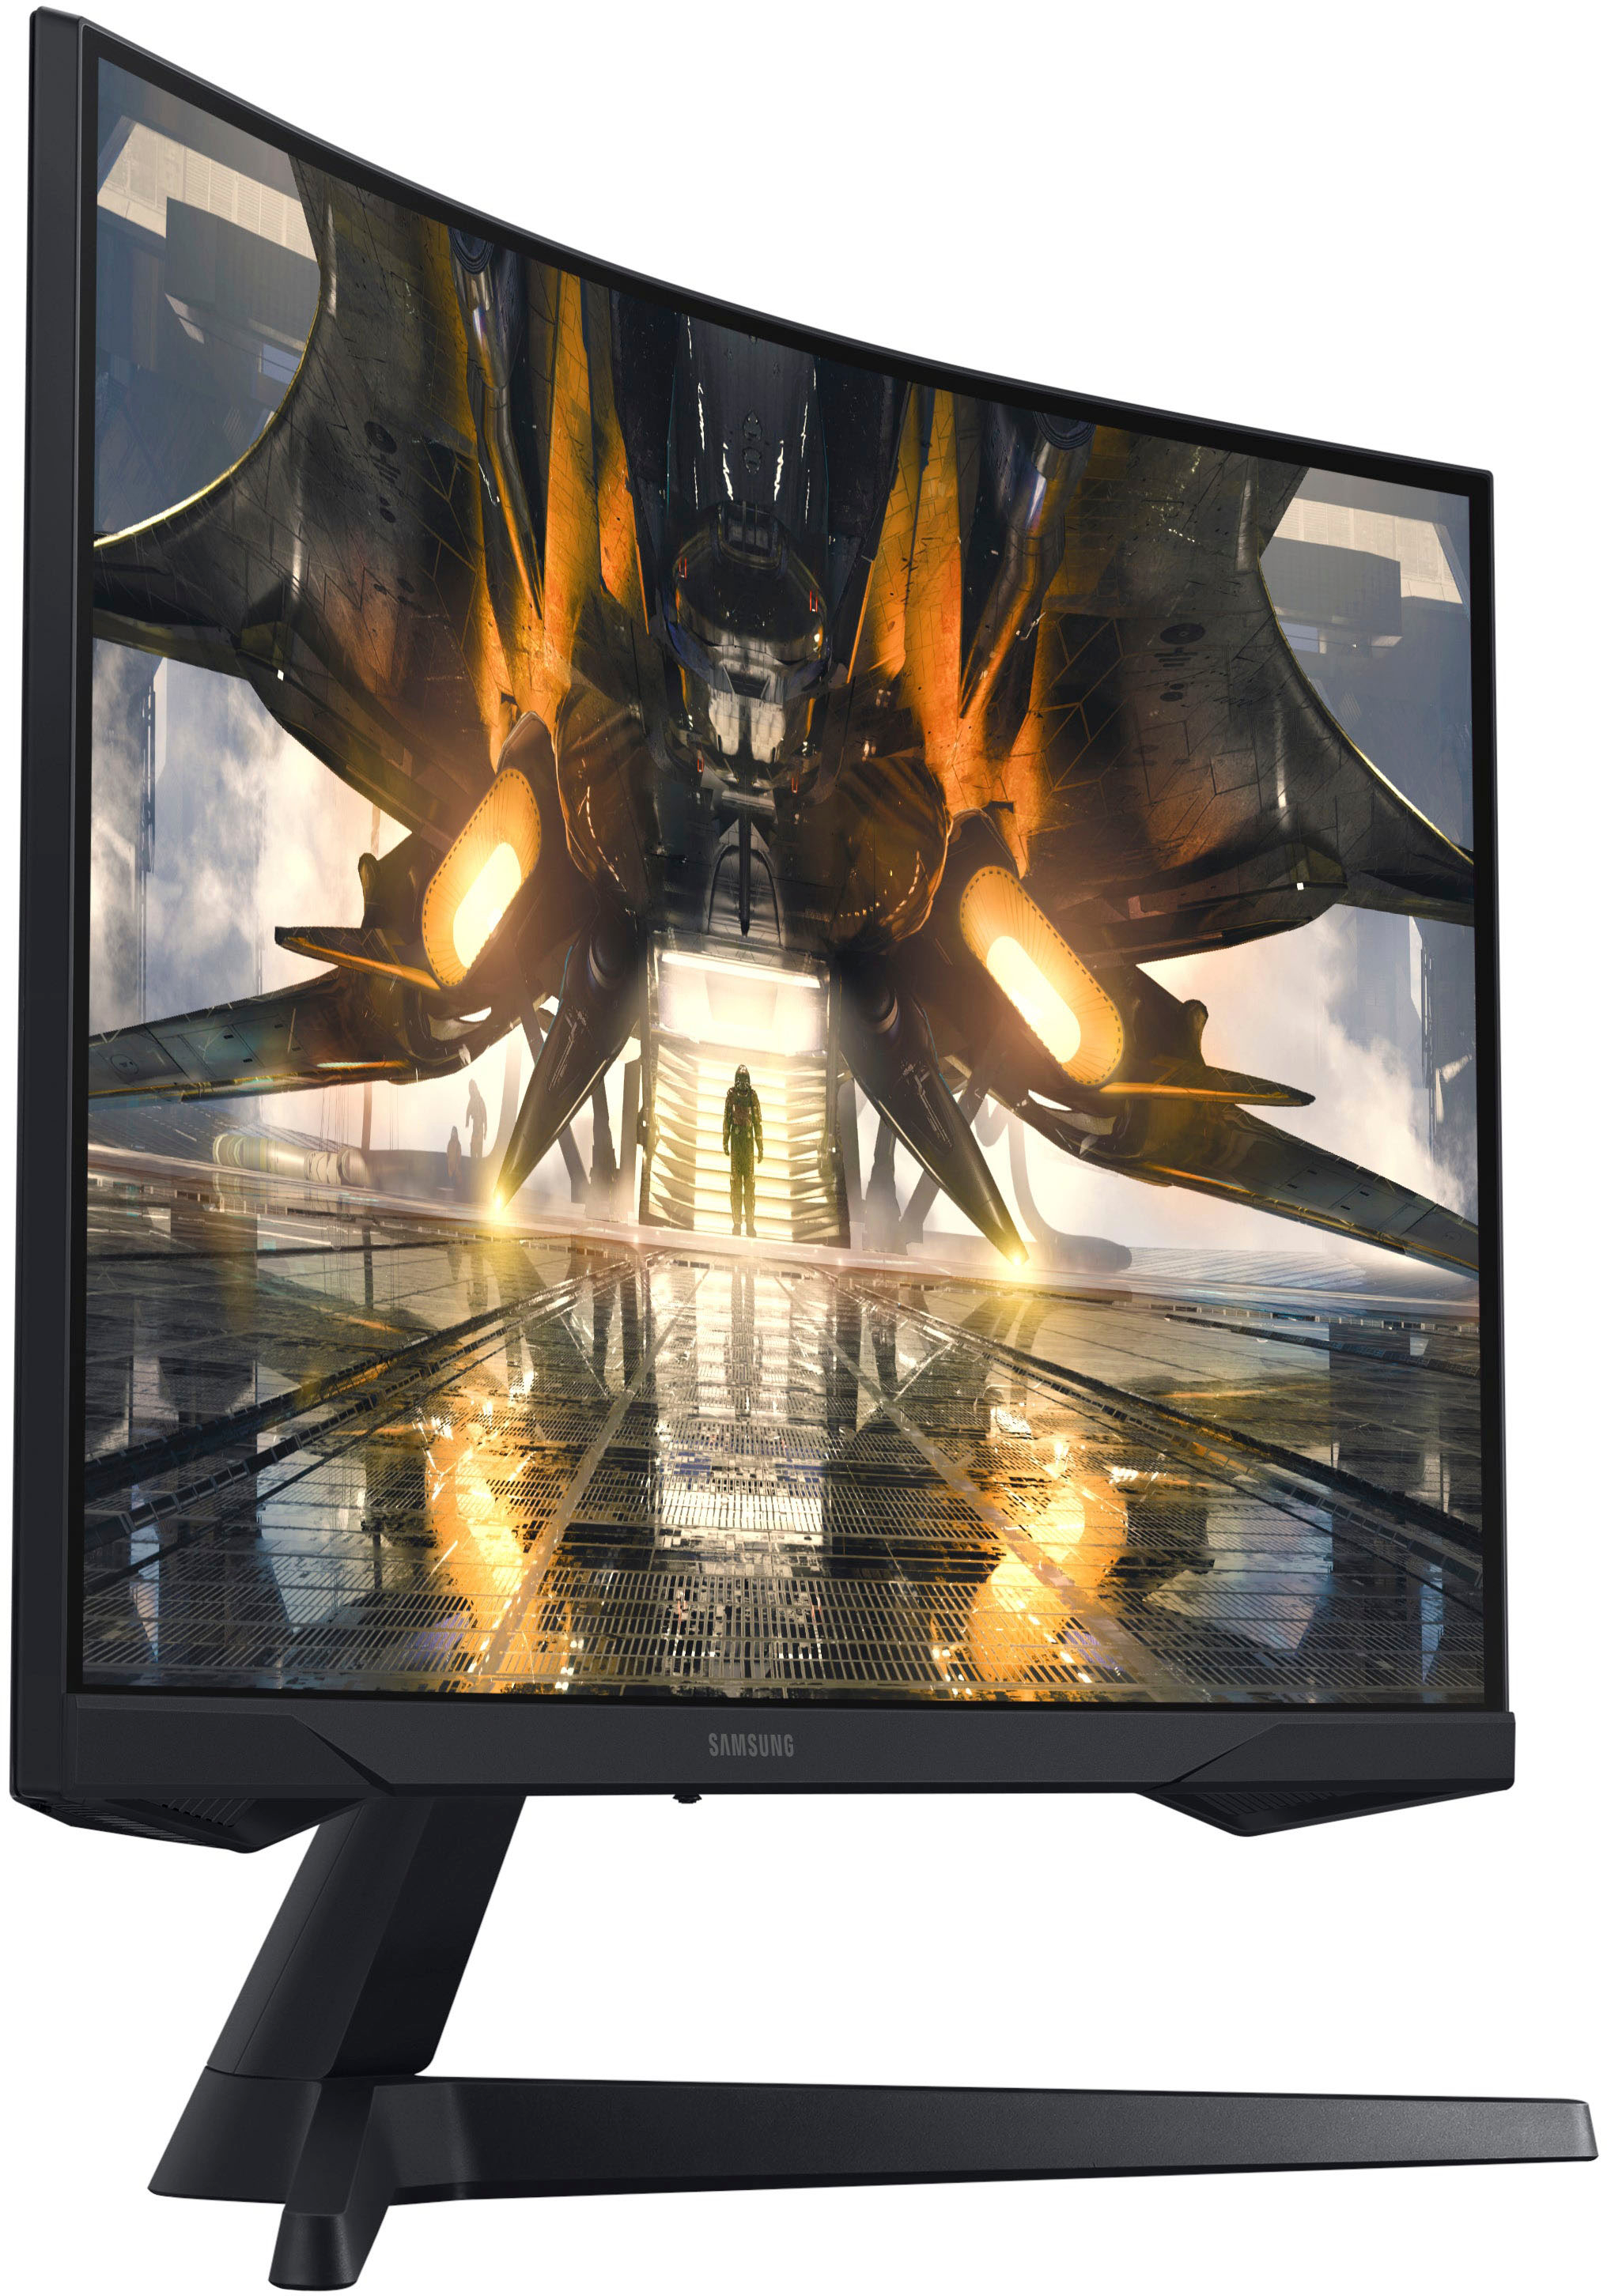 Samsung Odyssey G5 27 Curved Gaming Monitor - Black for sale